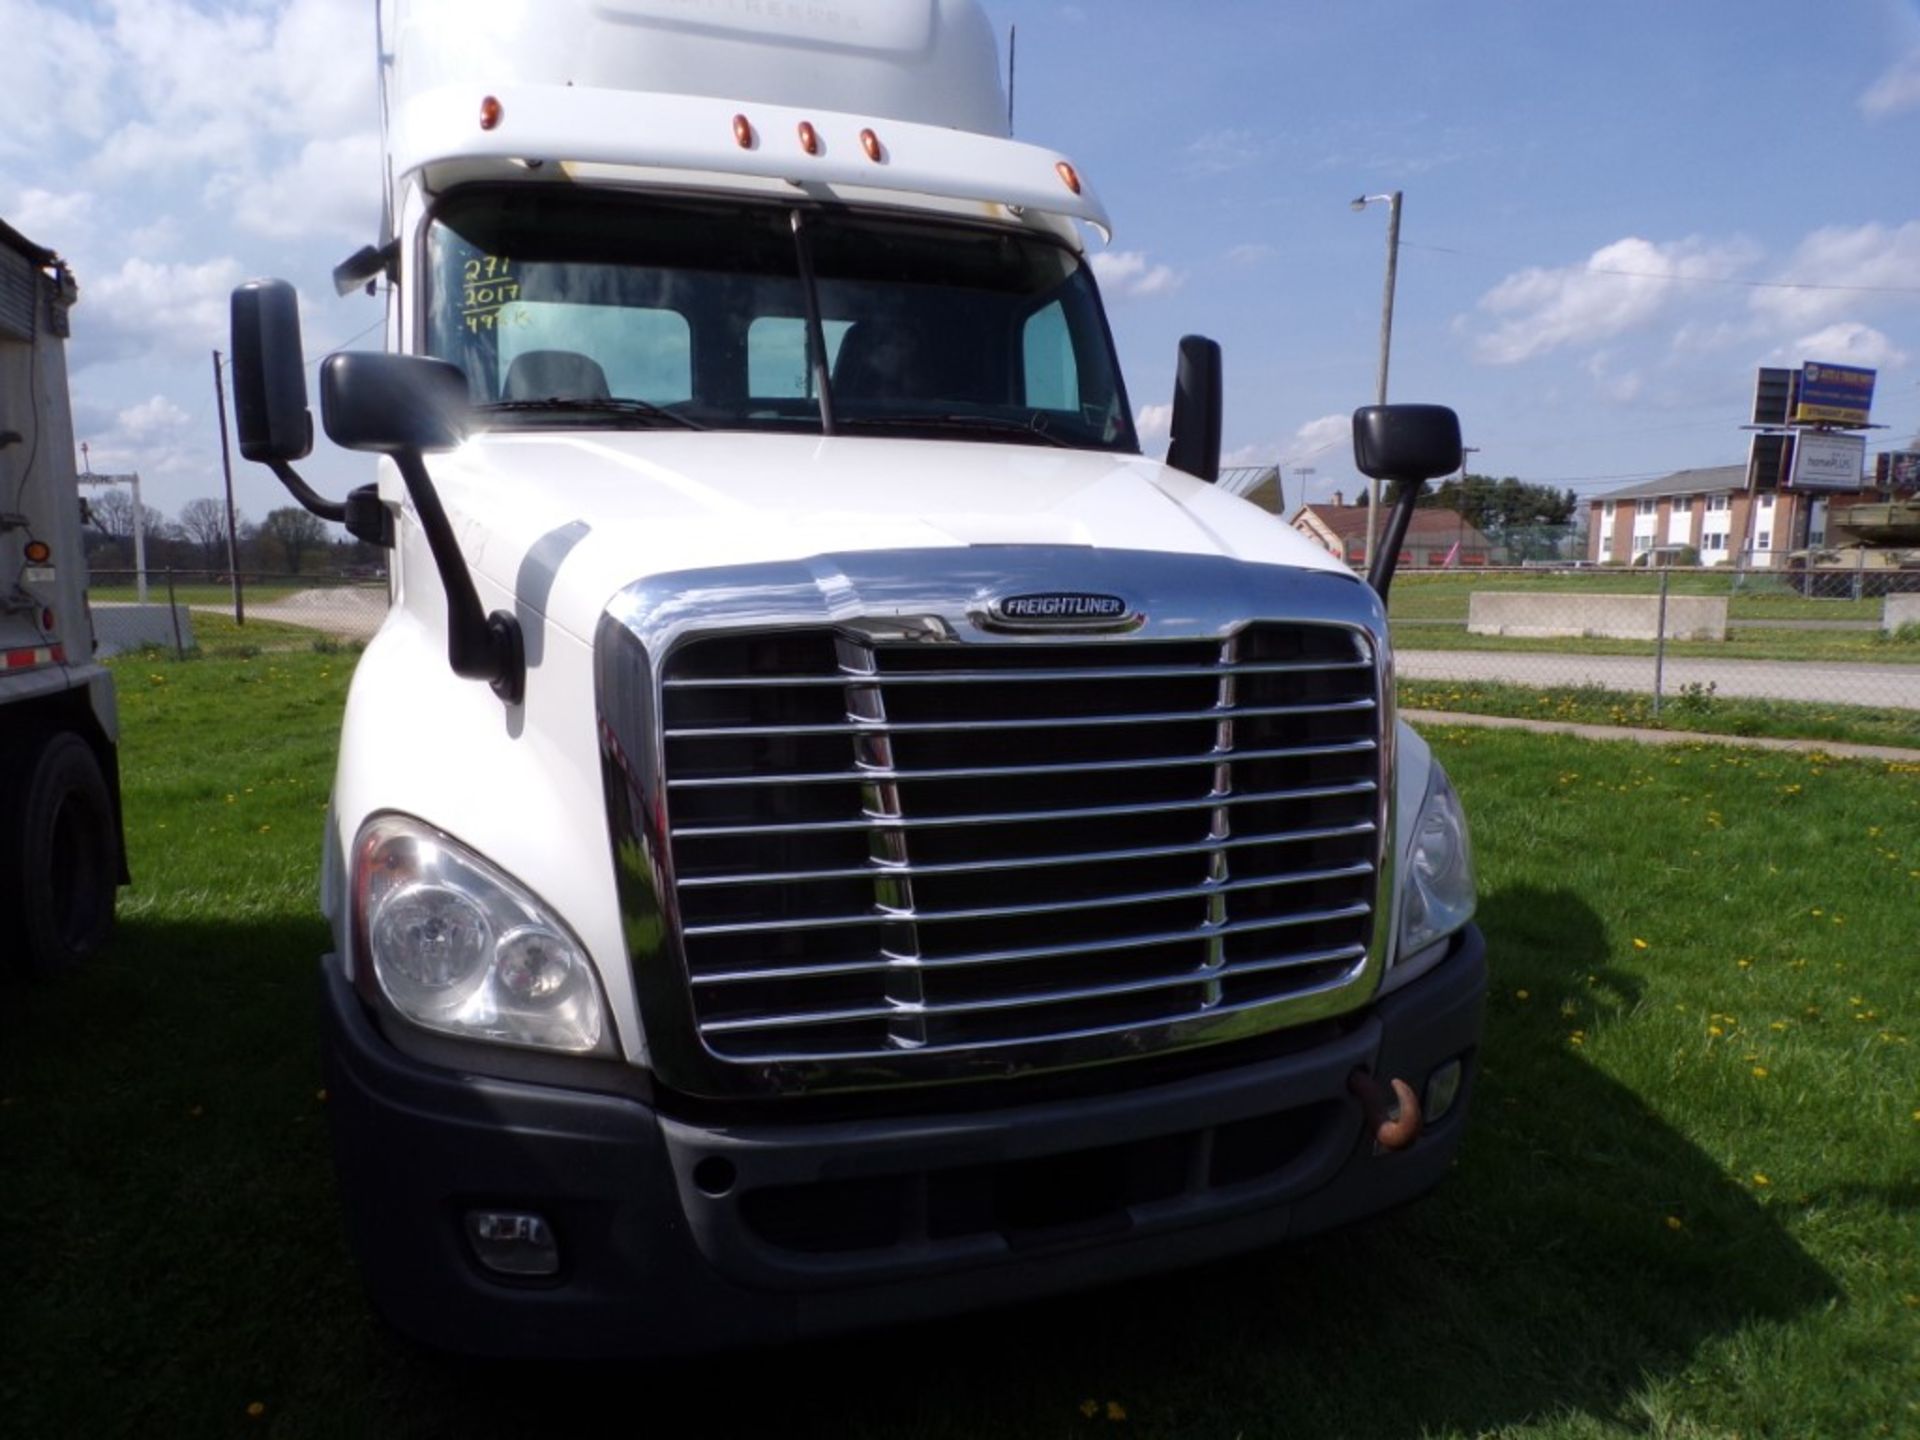 2017 Freightliner Cascadia Tandem Axle Day Cab Truck Tractor, Detroit dd15 Engine, 10 Spd. Manual - Image 7 of 8